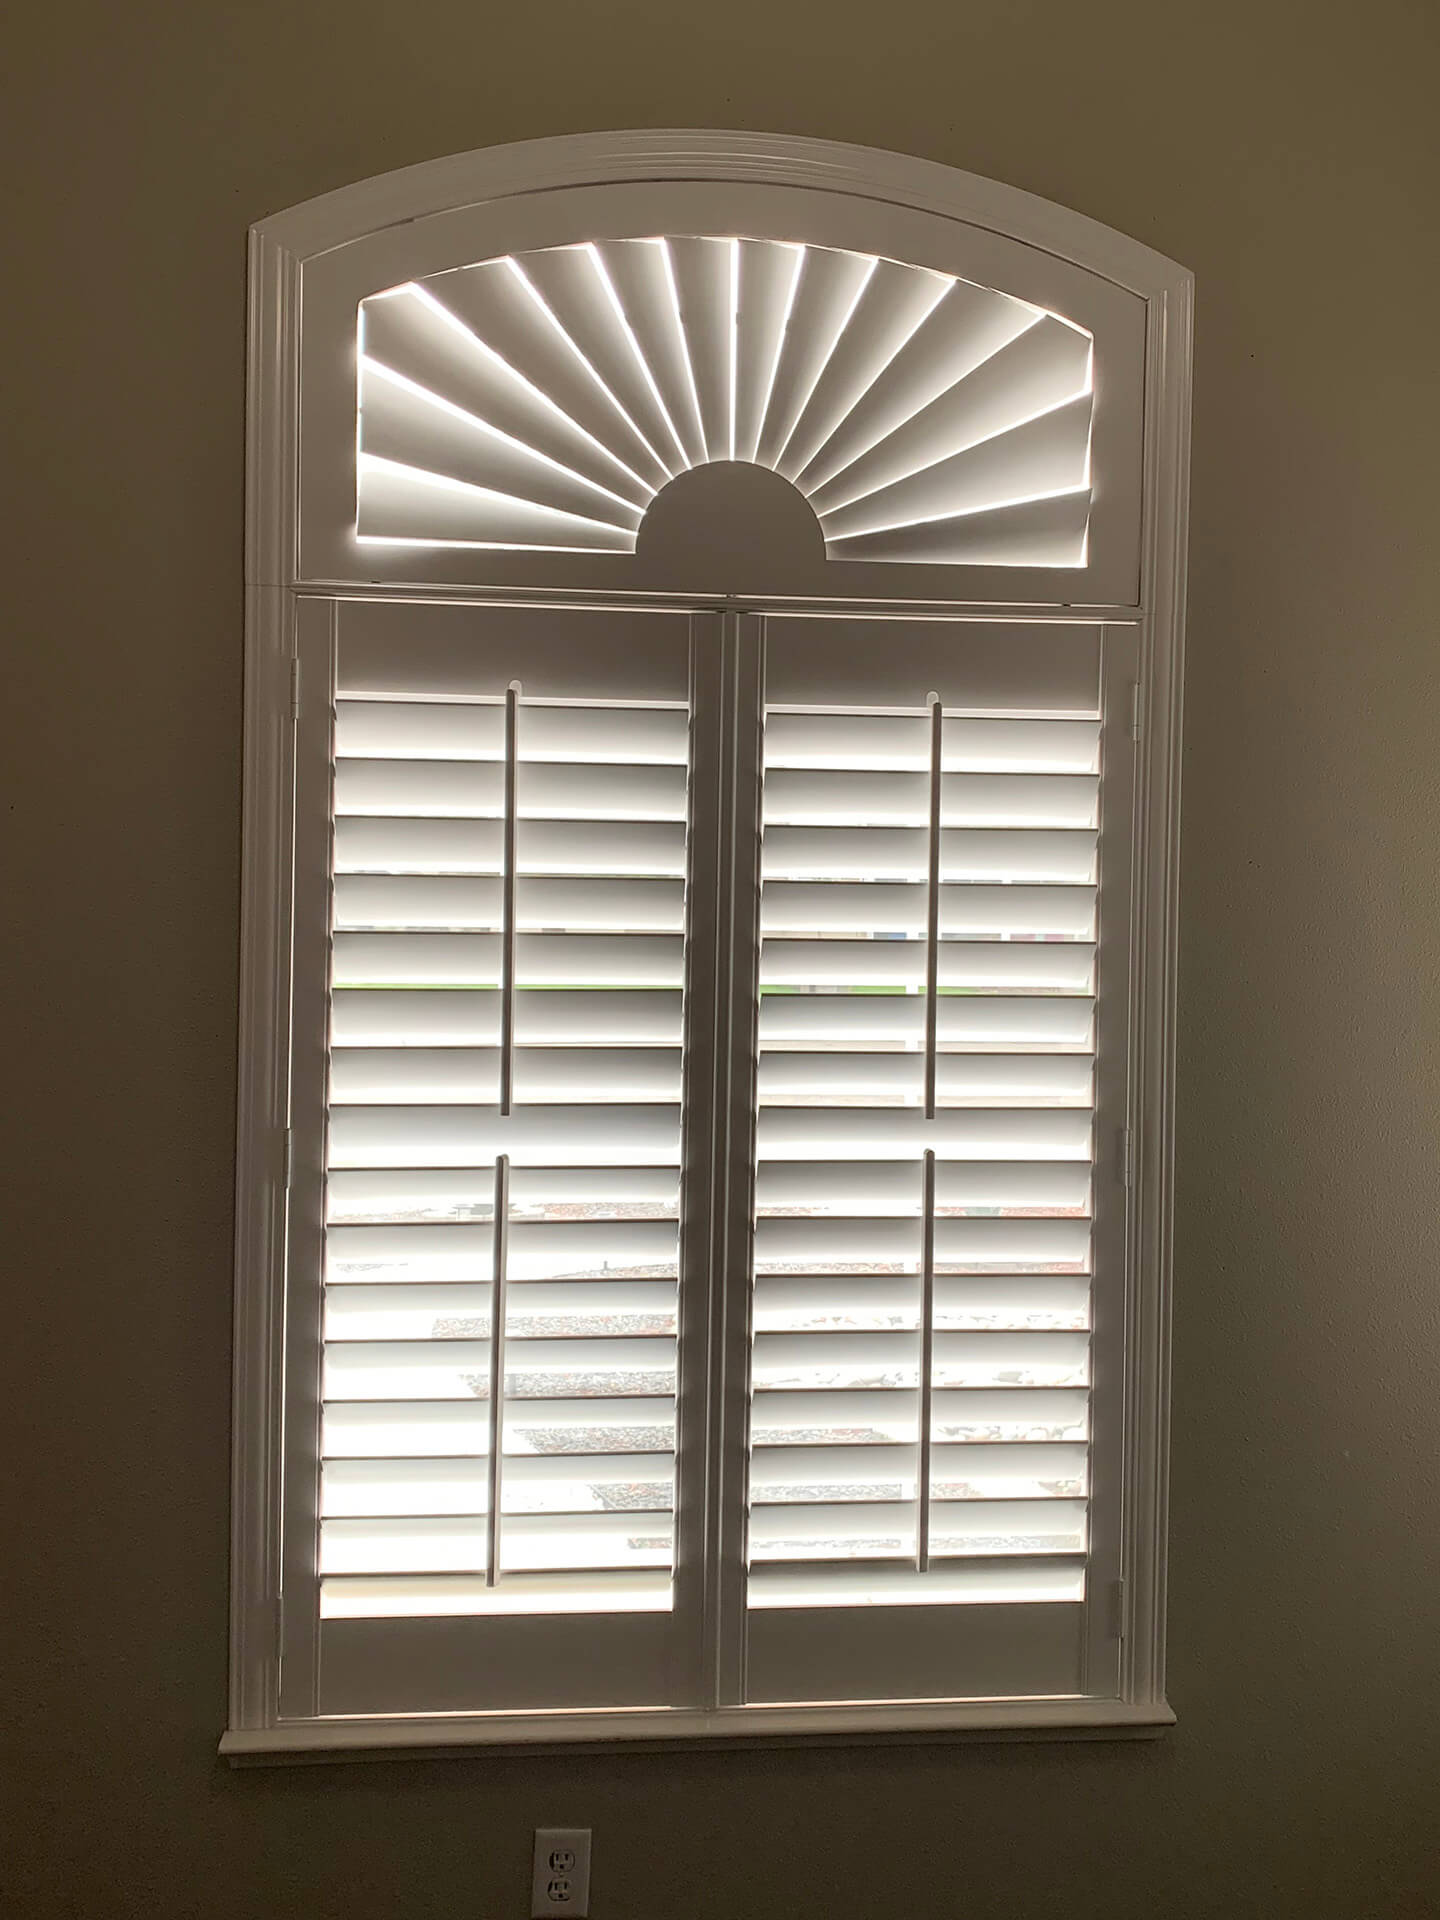 A single window covered with decorative shutters.